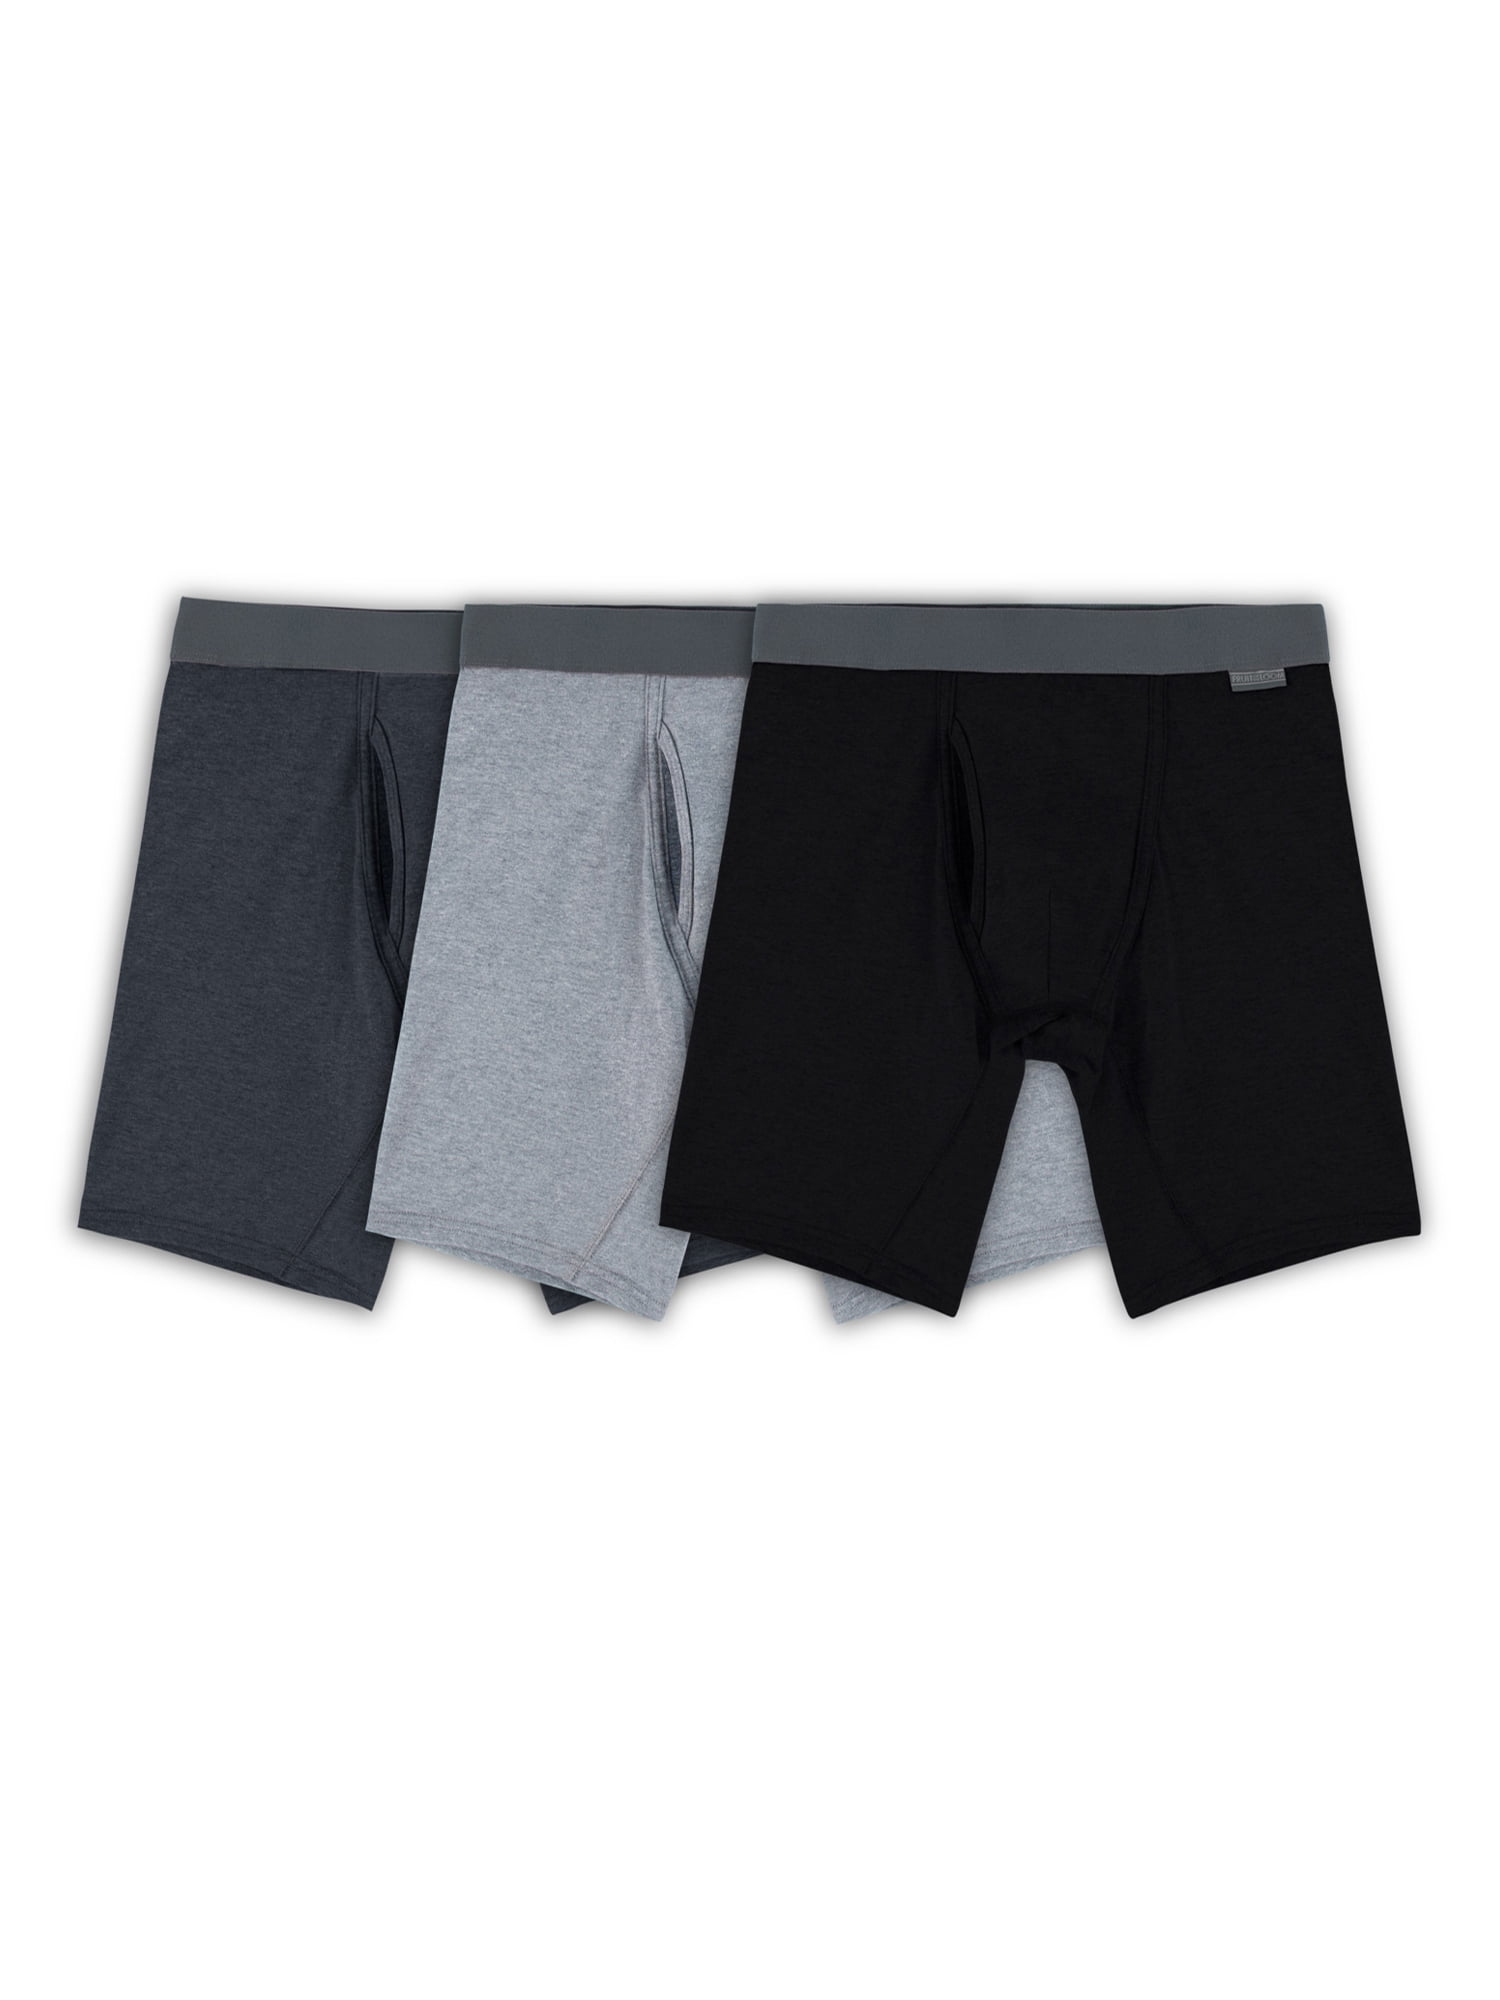 Fruit of the Loom Men's Crafted Comfort Long Leg Boxer Briefs, 3 Pack, Sizes S-3XL